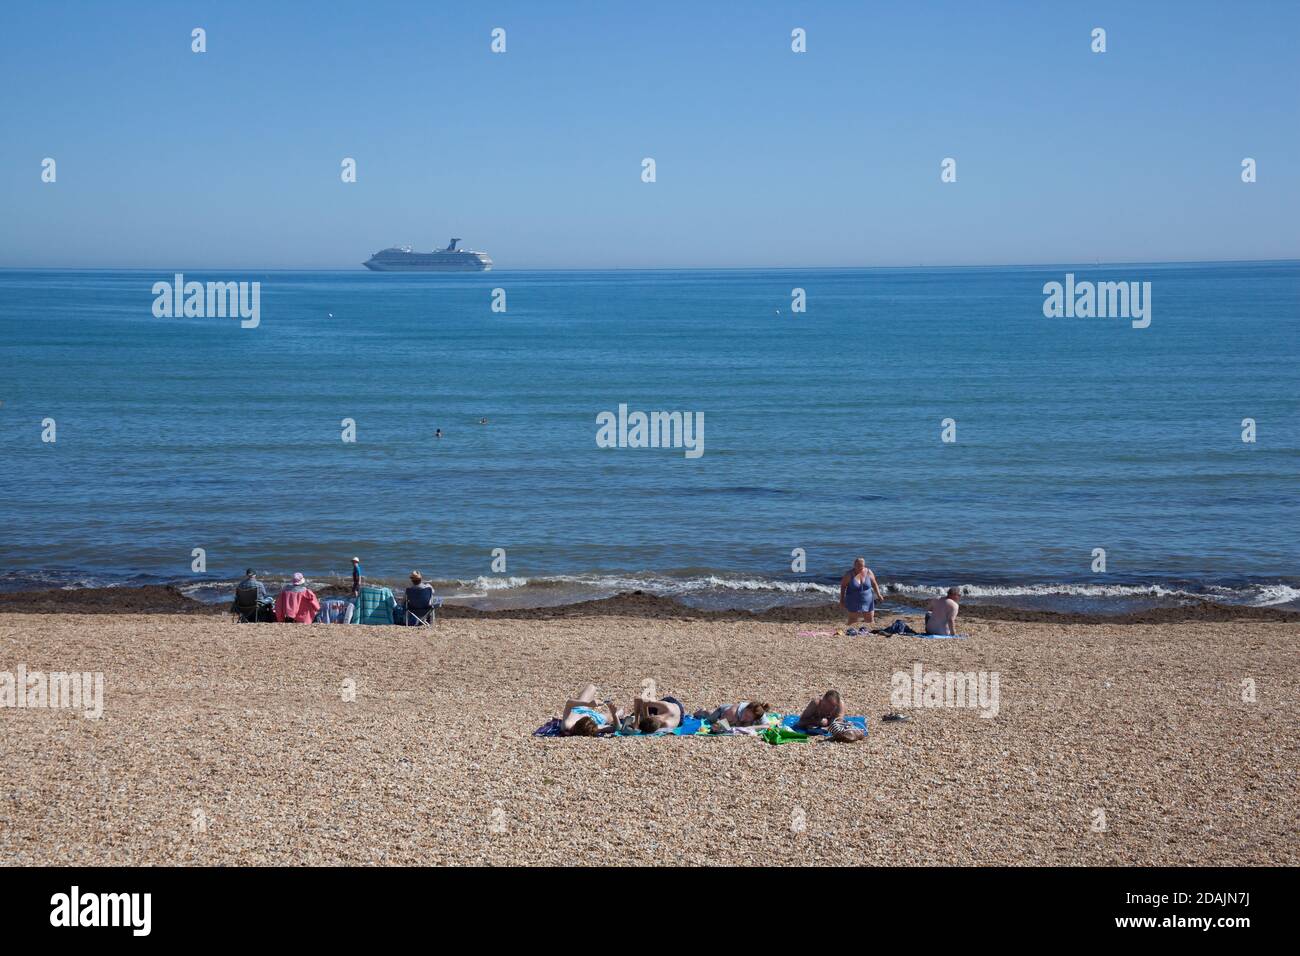 People relaxing on Overcombe Beach in Dorset in the UK, taken on the 3rd of August 2020 Stock Photo